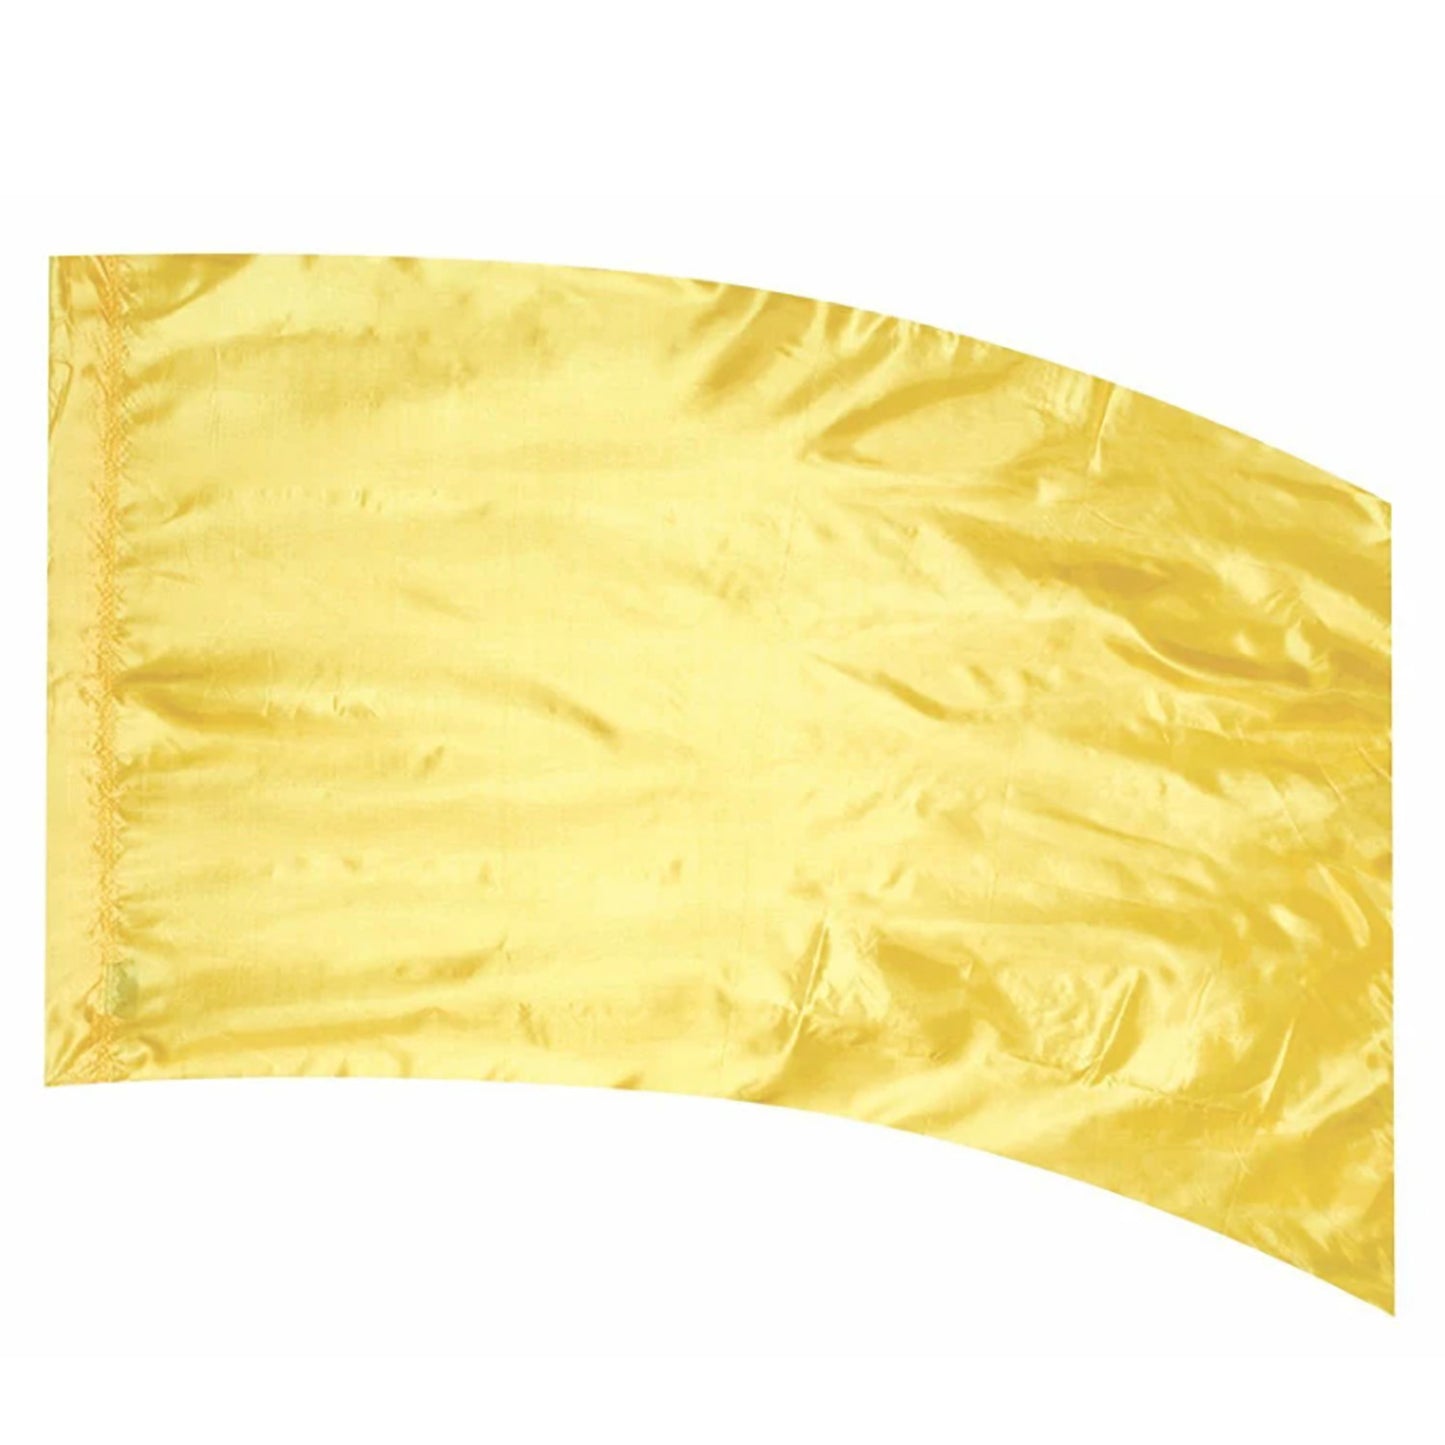 F-1 Poly China Silk Flag - 19 Colors